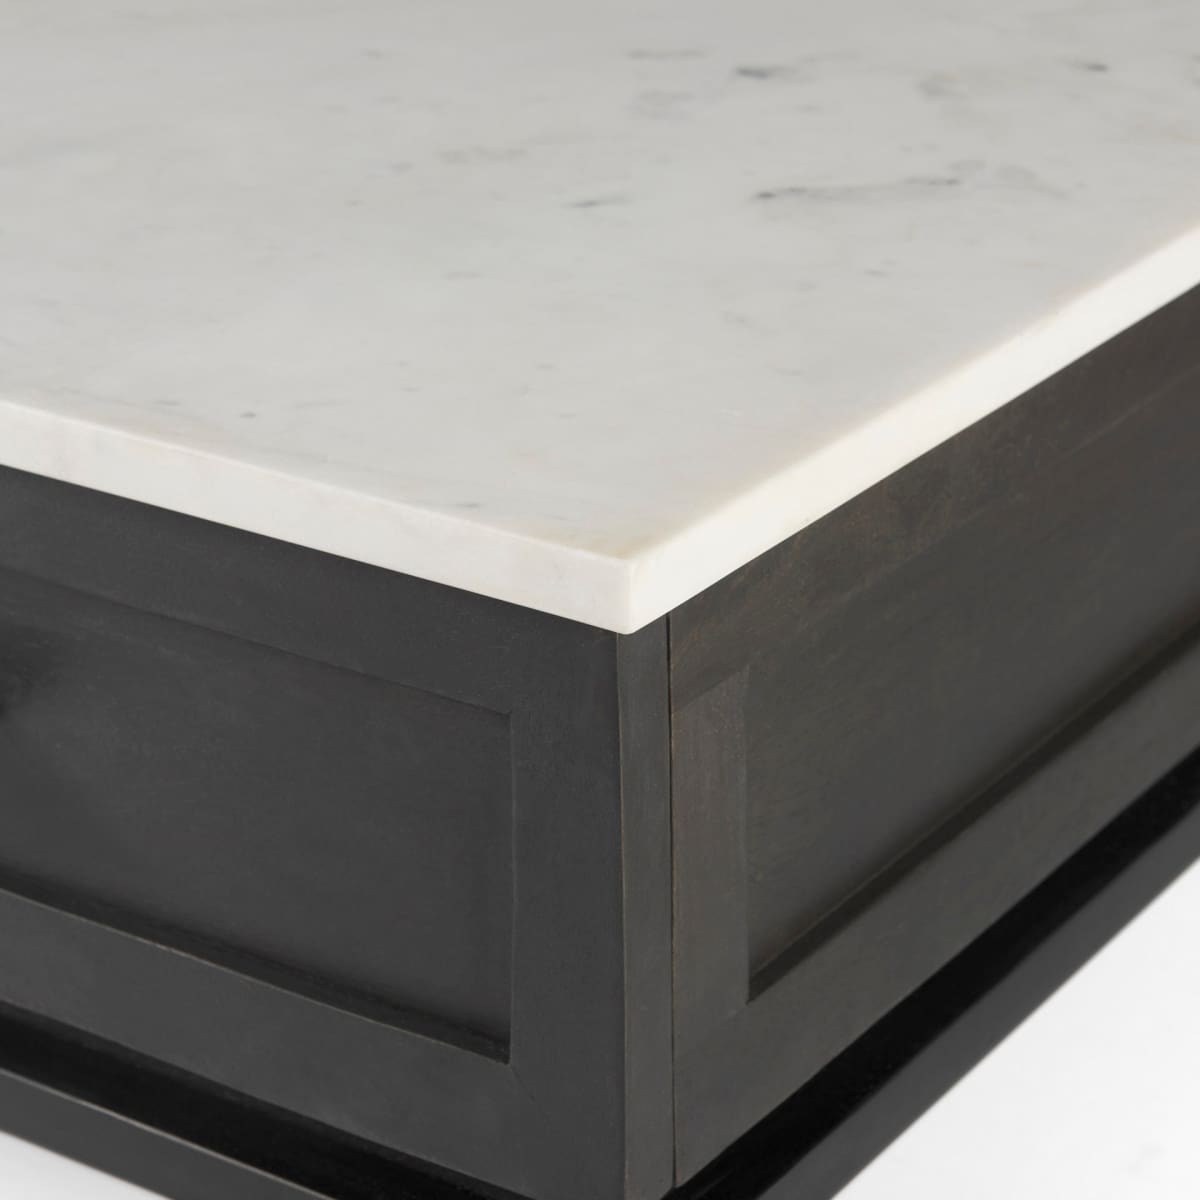 Divina Coffee Table White Marble | Dark Brown Wood - coffee-tables